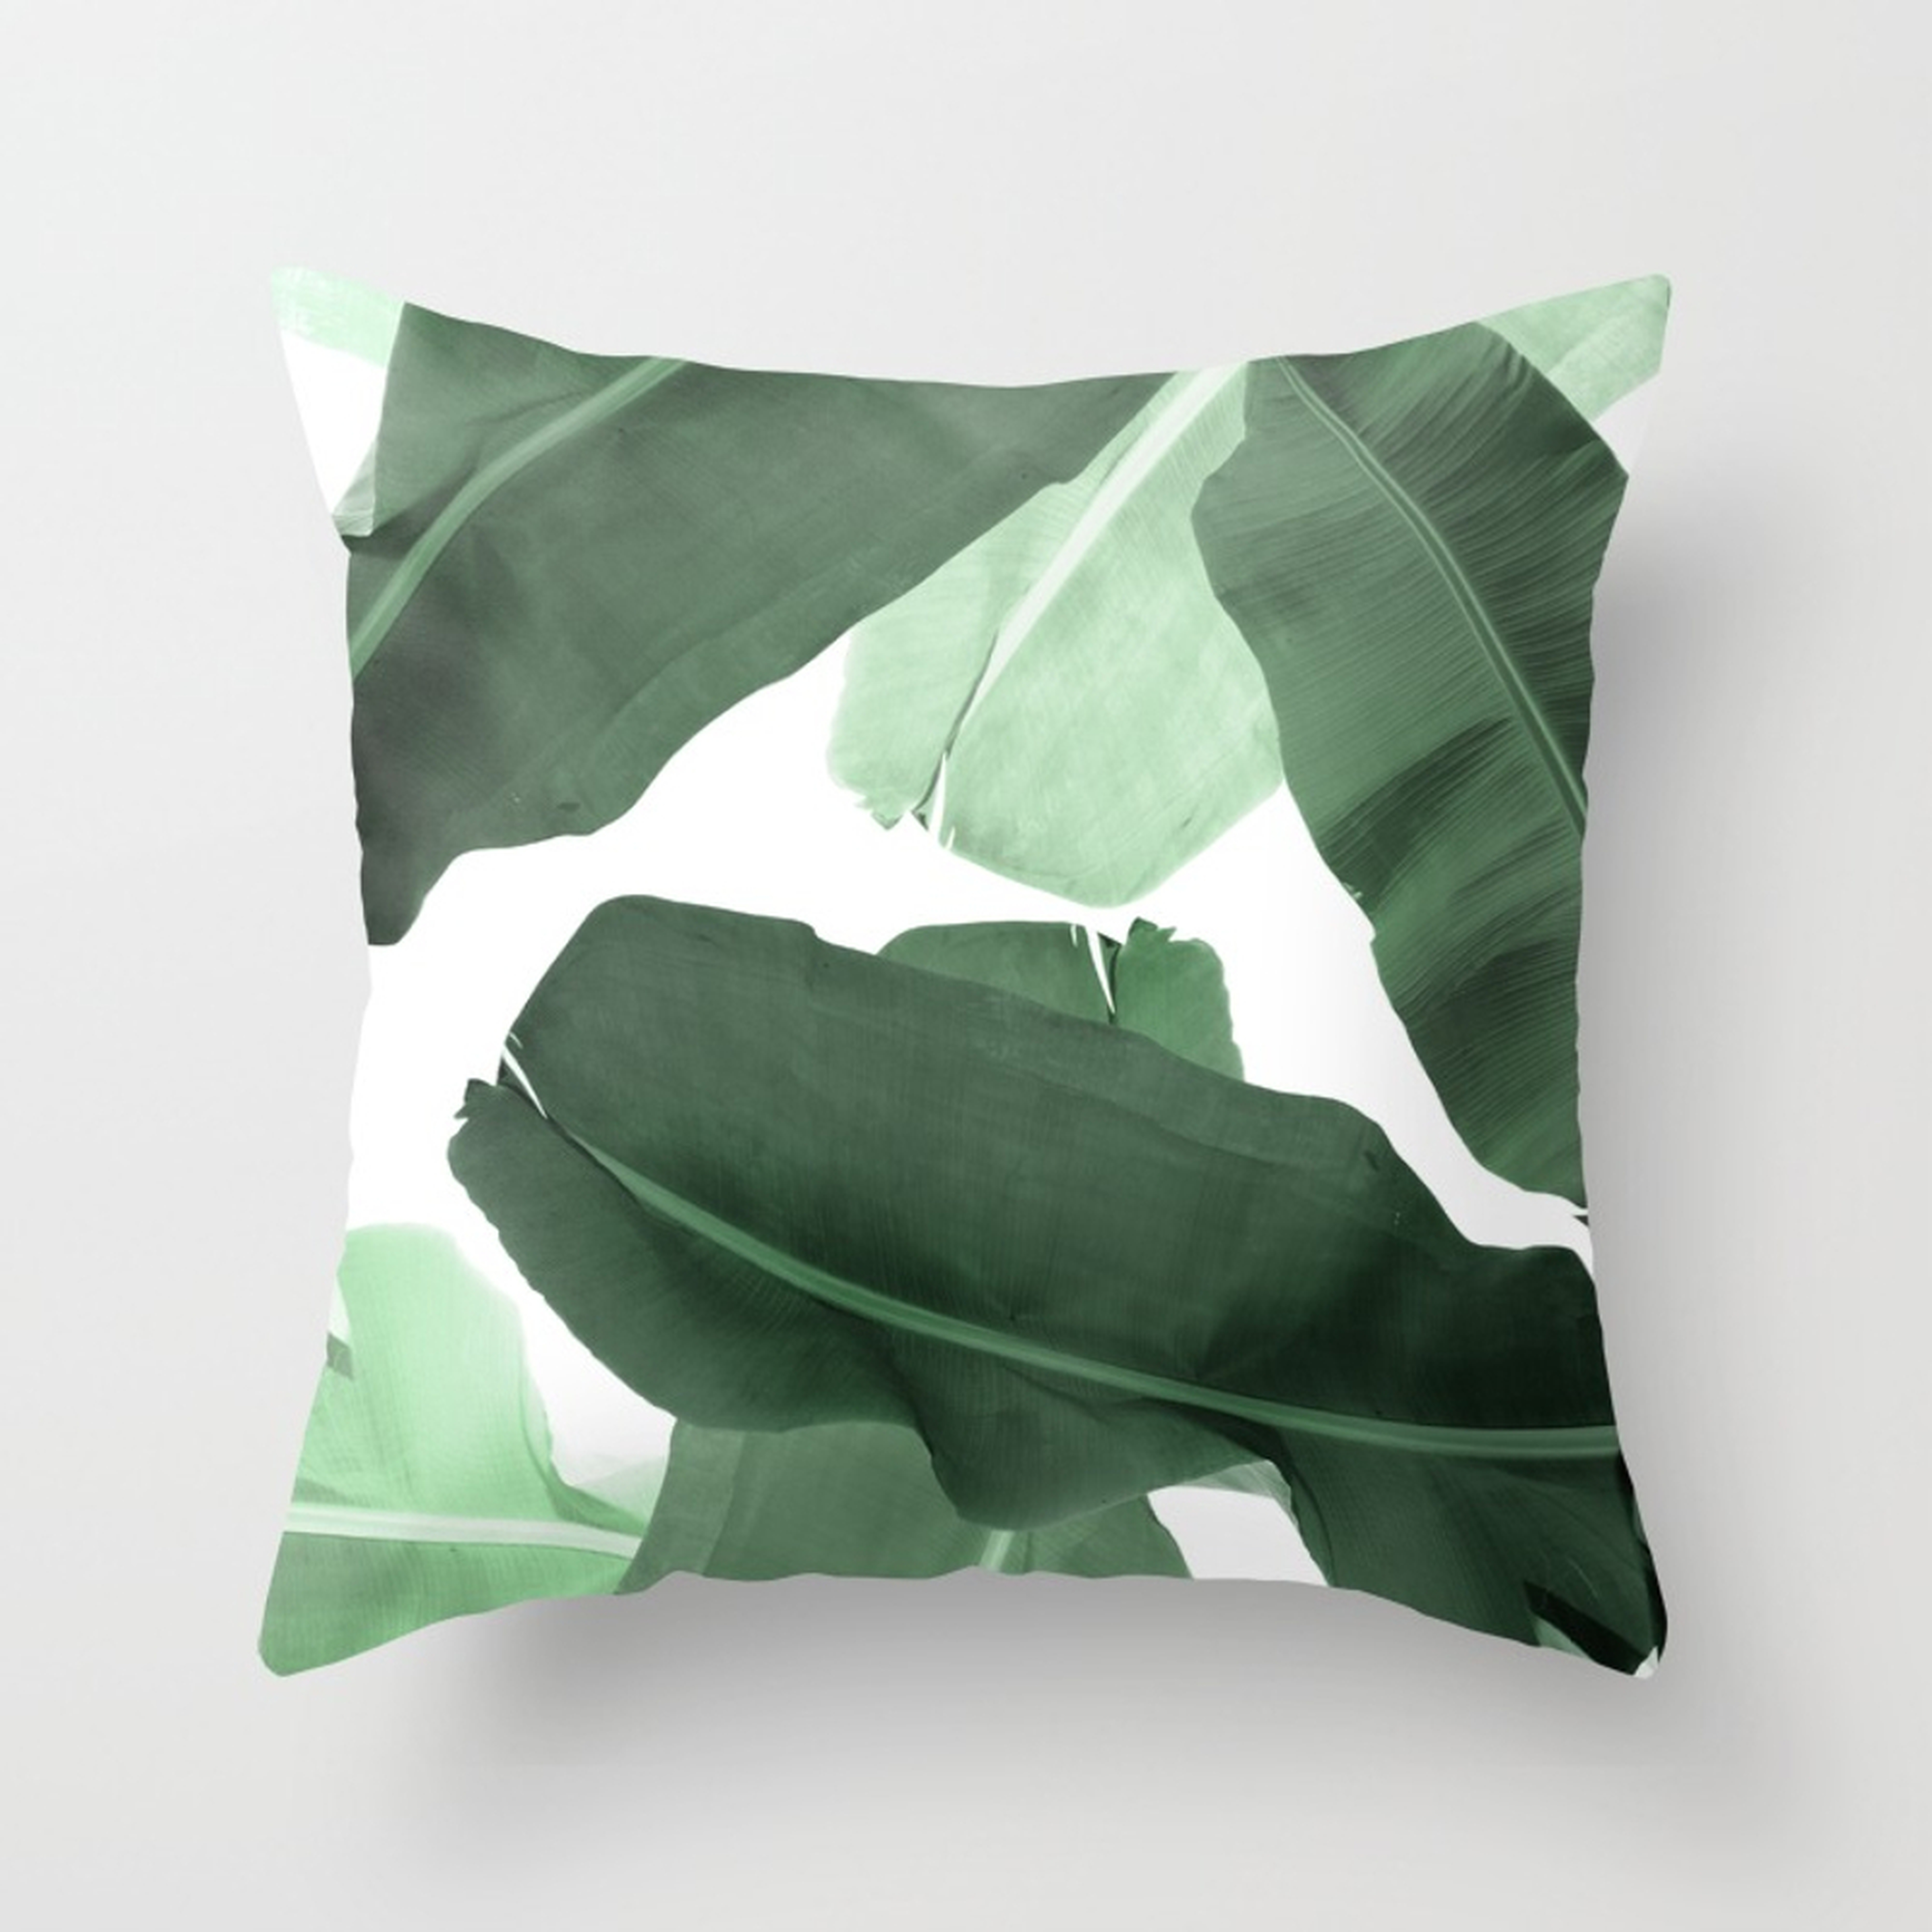 Green Banana Leaf Throw Pillow by Printsproject - Cover (20" x 20") With Pillow Insert - Outdoor Pillow - Society6